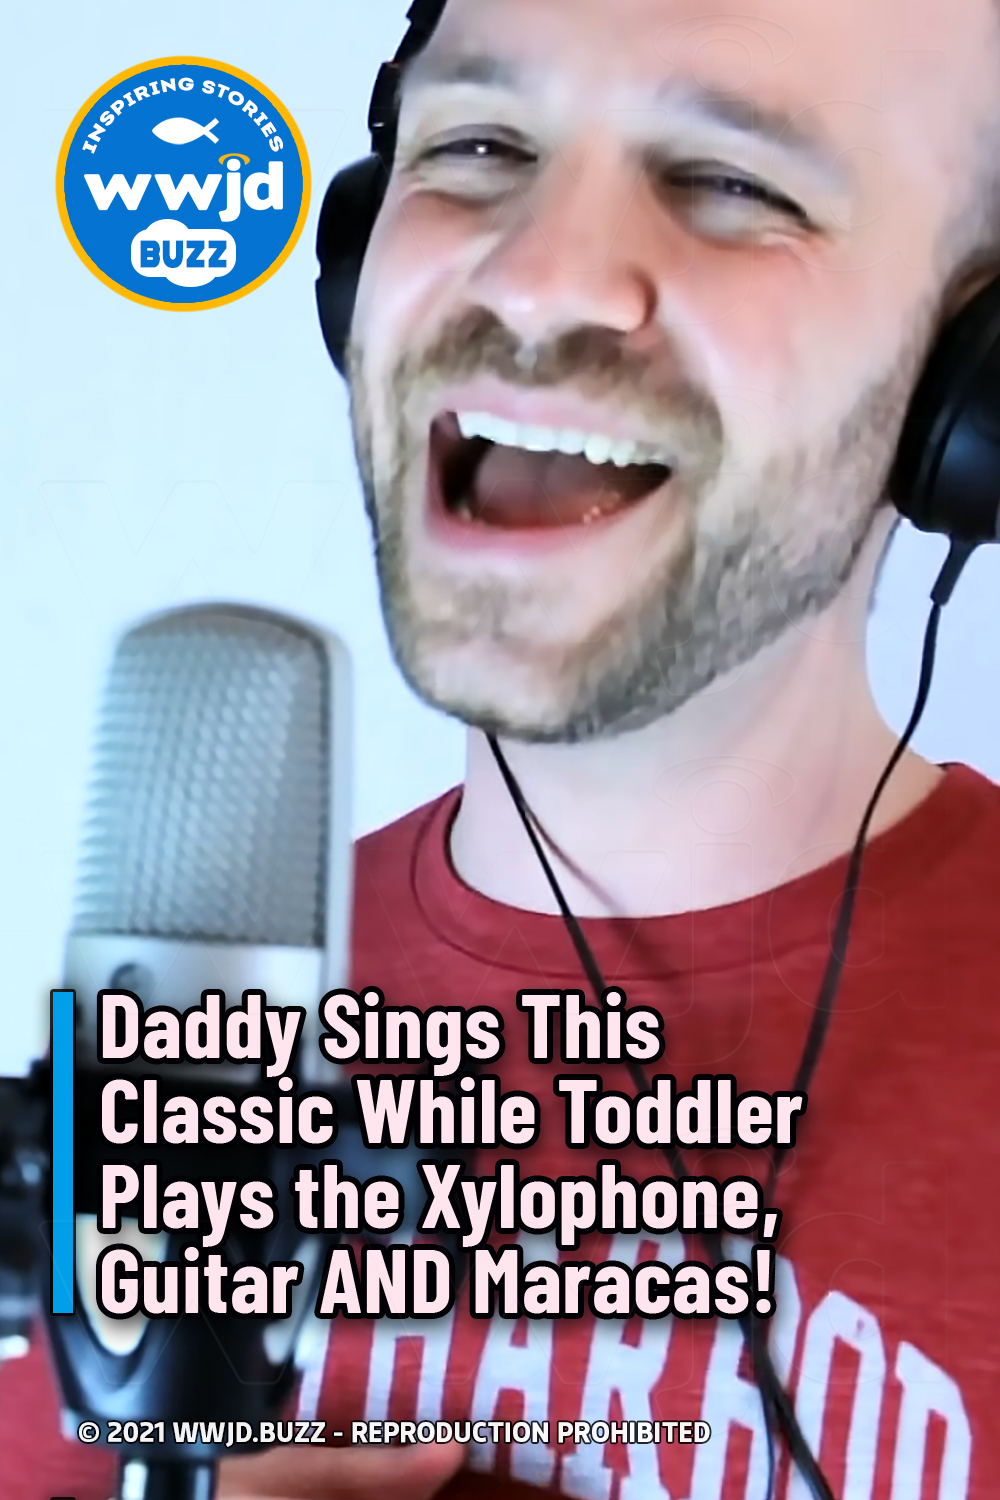 Daddy Sings This Classic While Toddler Plays the Xylophone, Guitar AND Maracas!